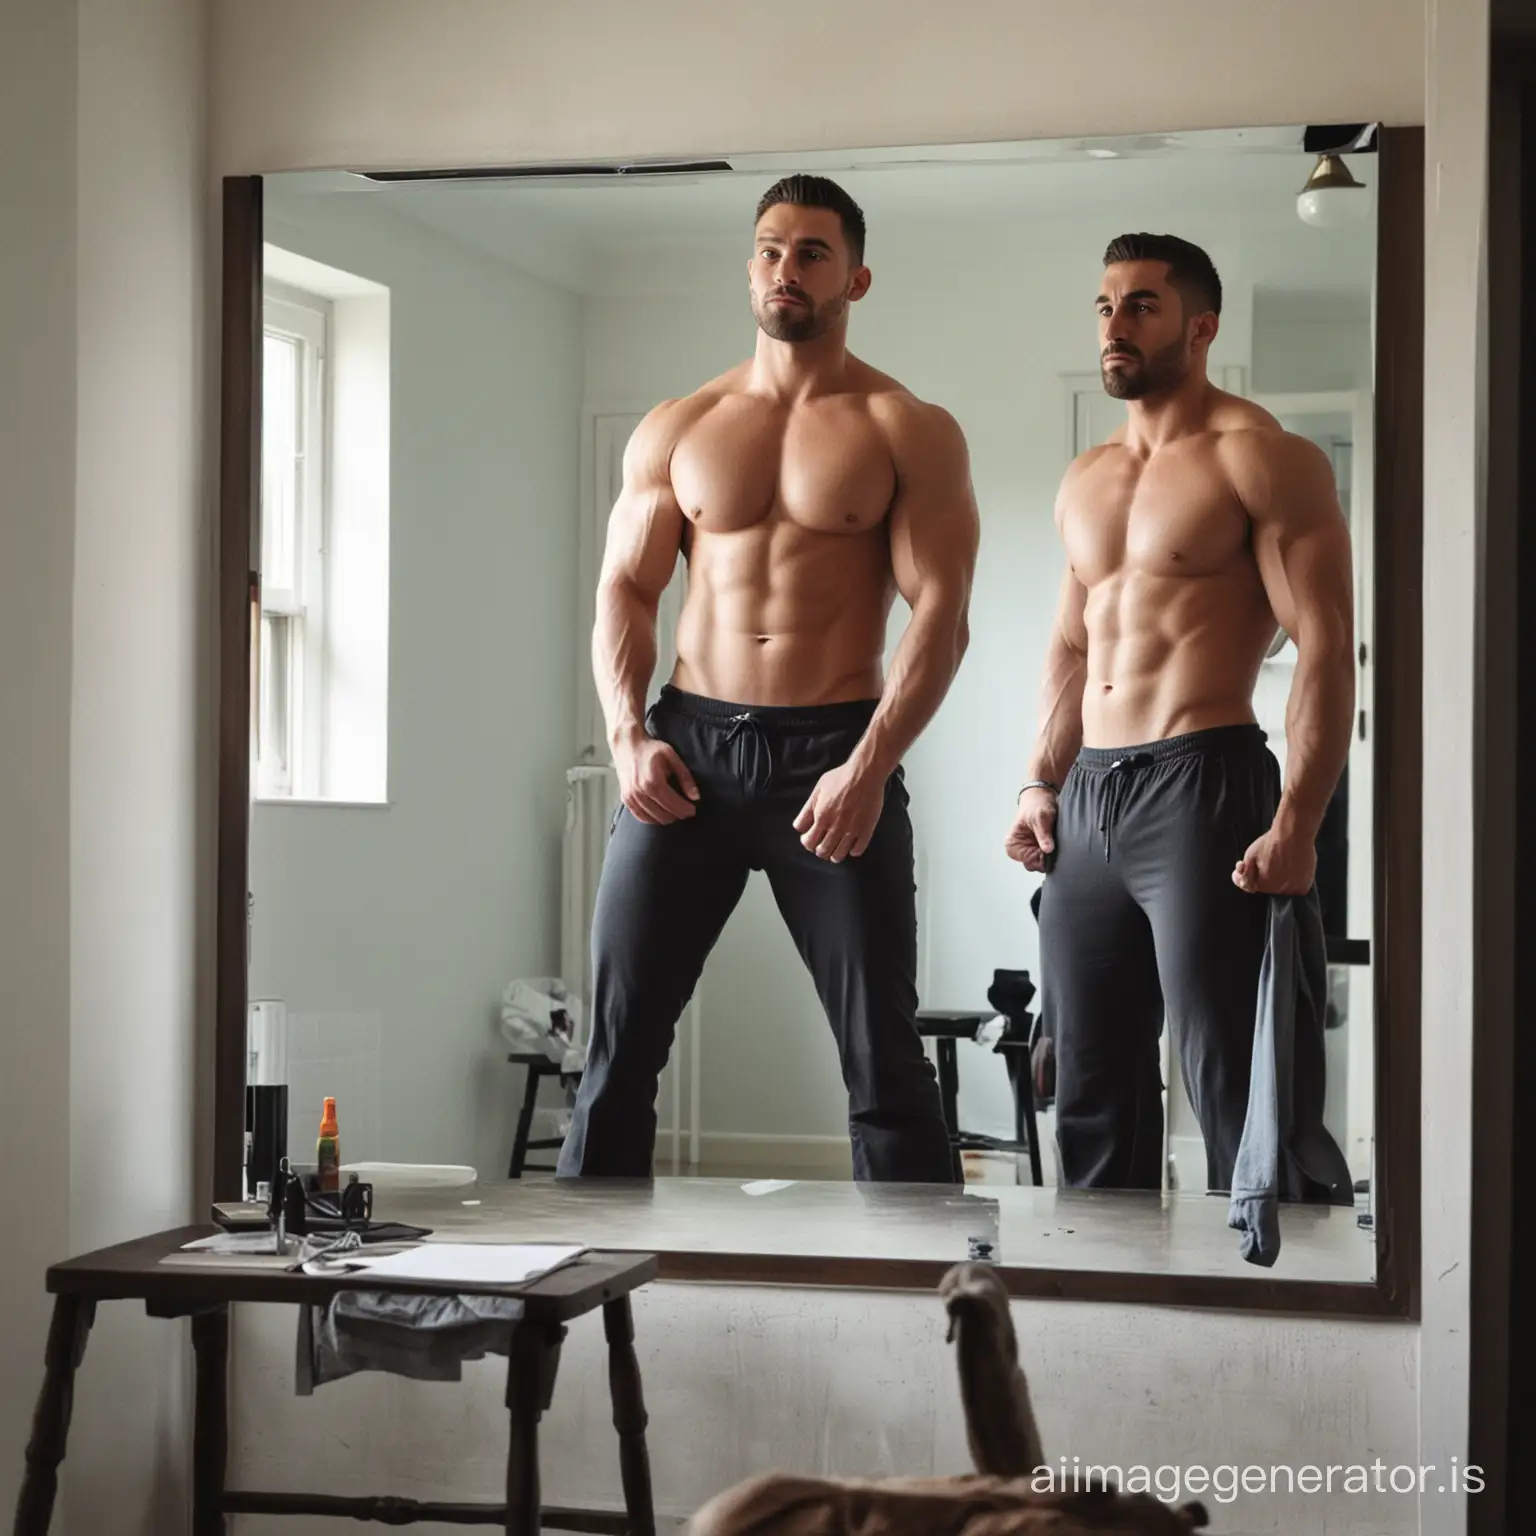 A strong man standing in front mirror